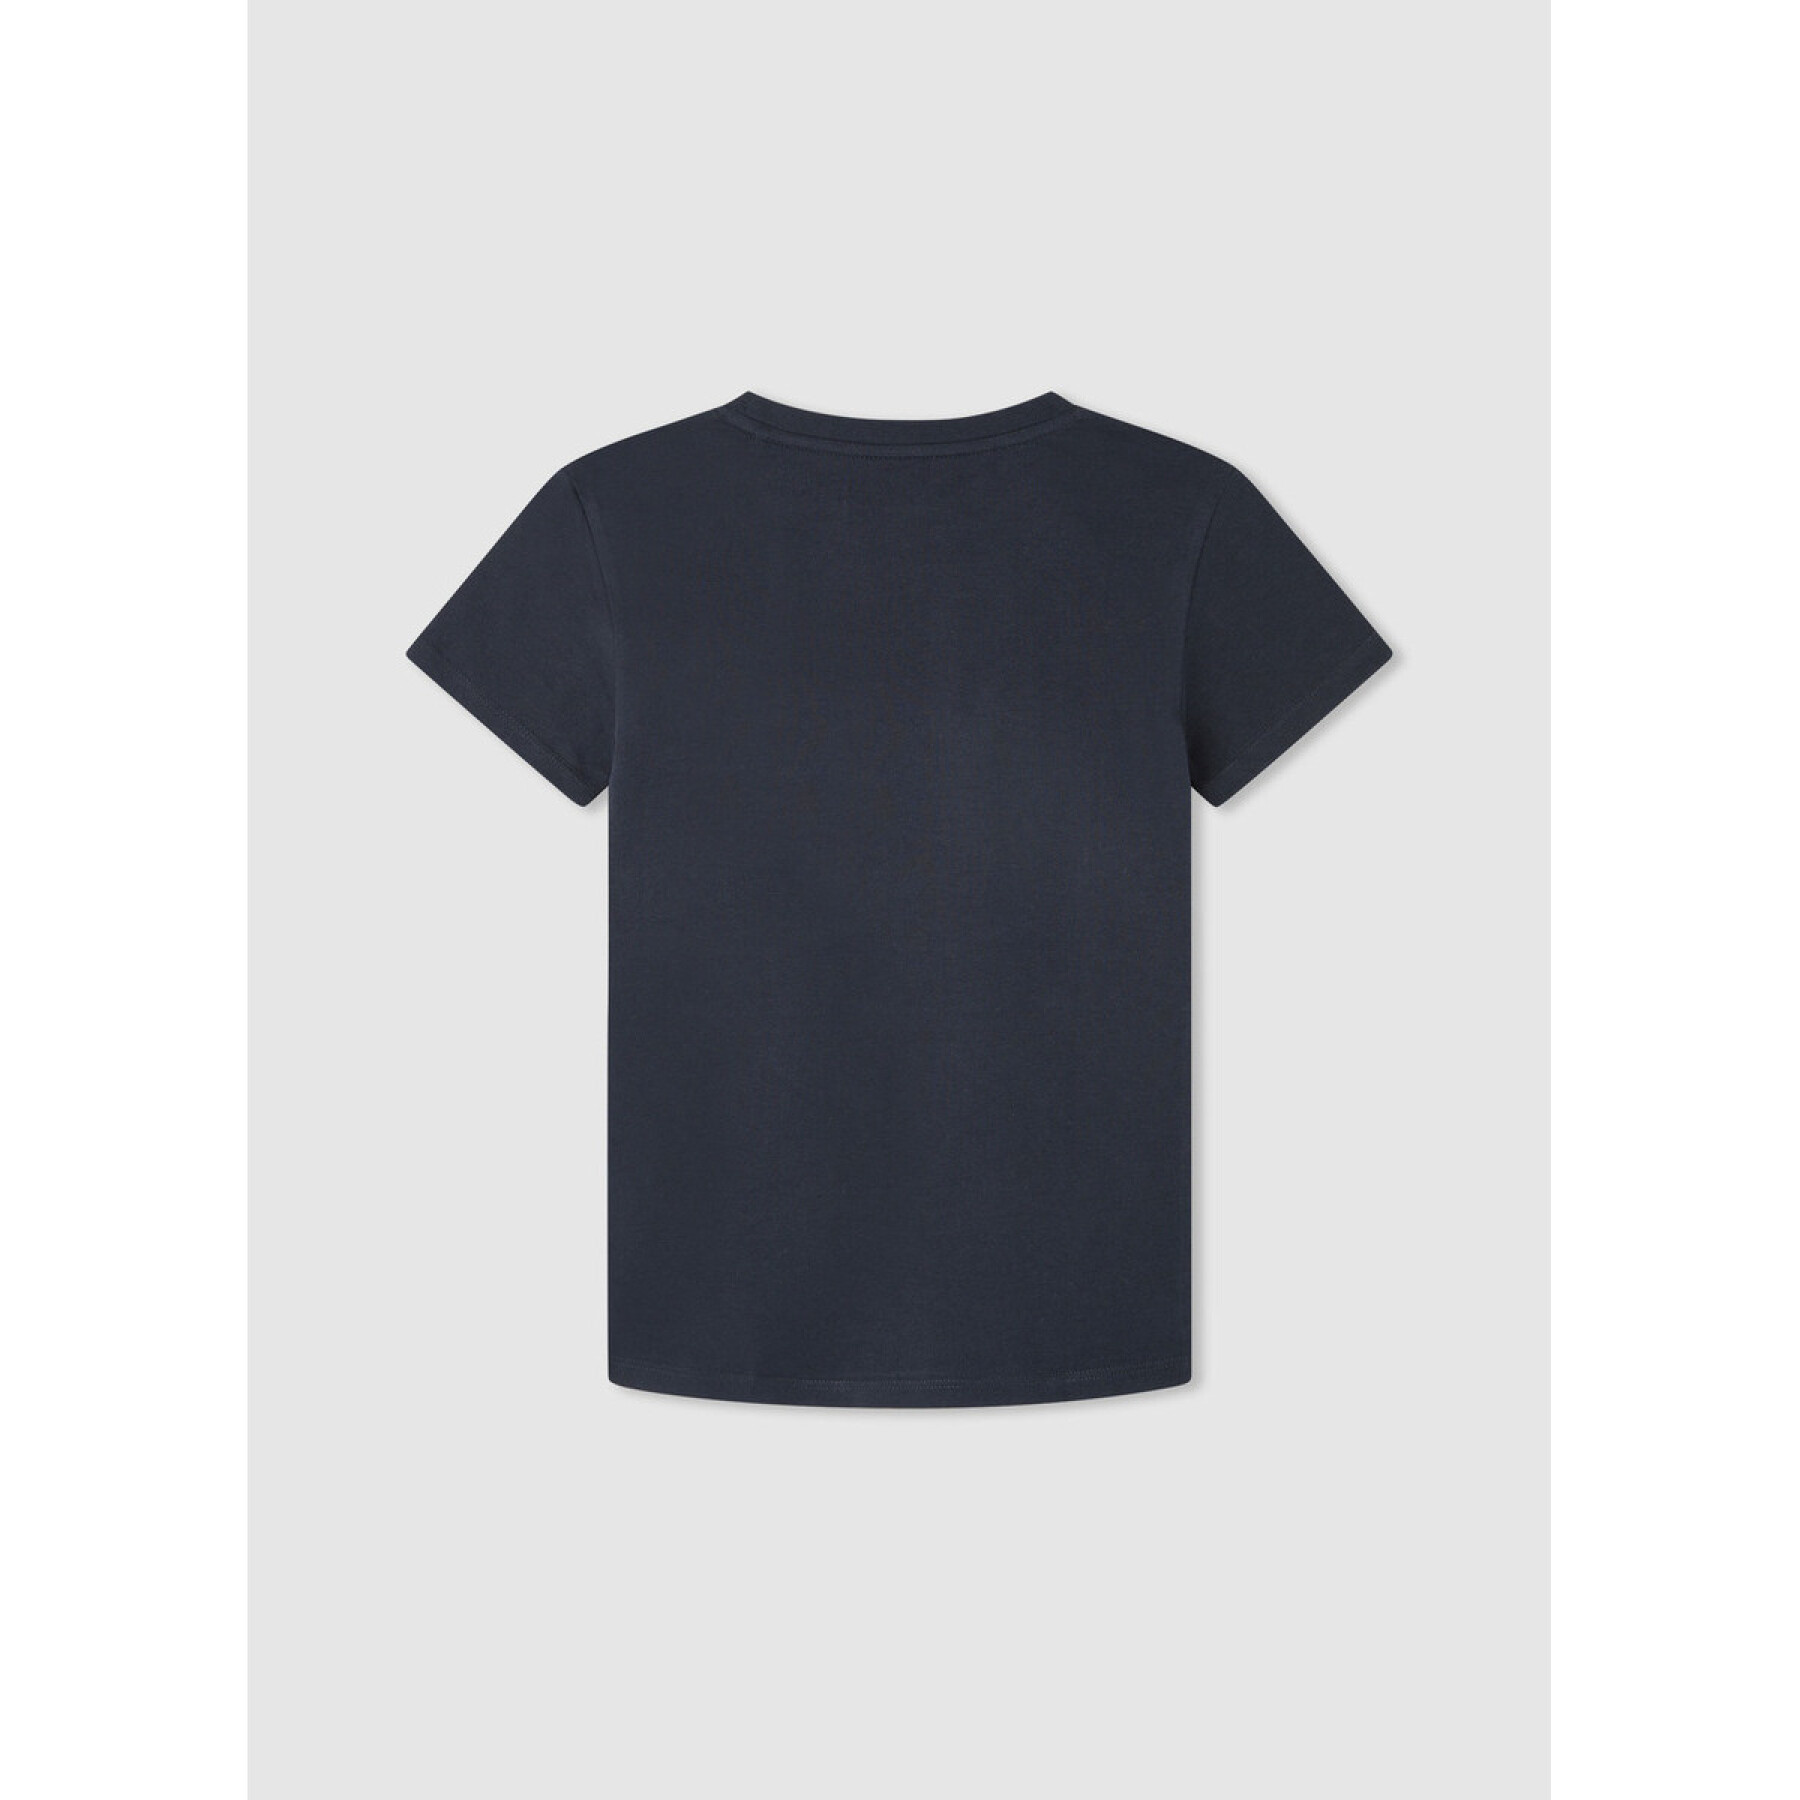 T-Shirt Pepe Jeans Rafer